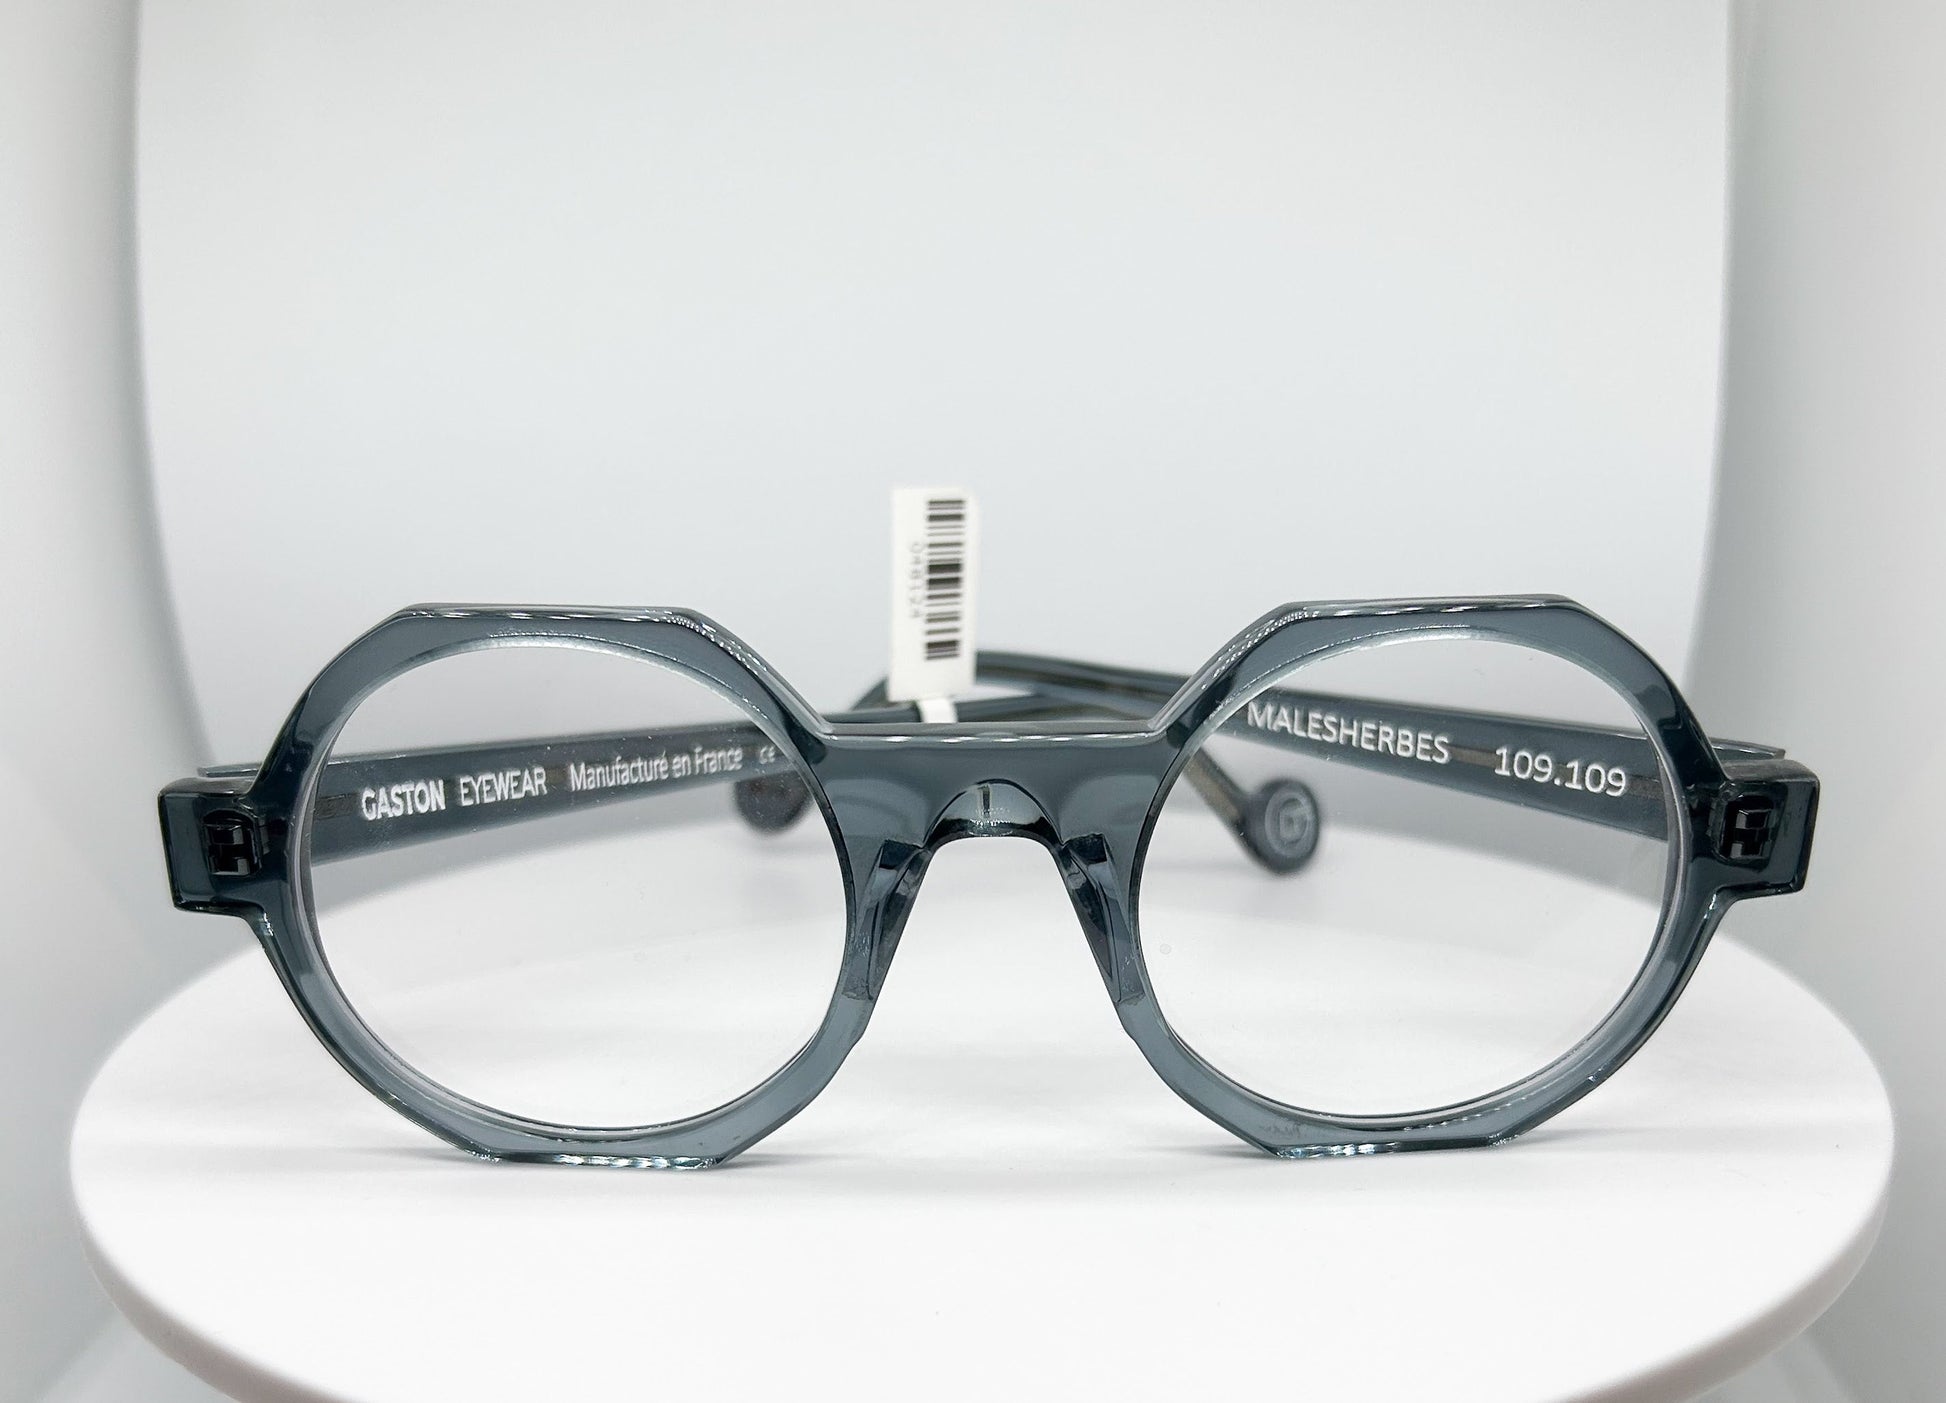 Buy Gaston Eyewear - Malesherbes, a  Transparent gray; Acetate Optical Frame with a Round shape. An Authorized Dealer, Adair Eyewear has a 40+ Years History of Customer Service Excellence